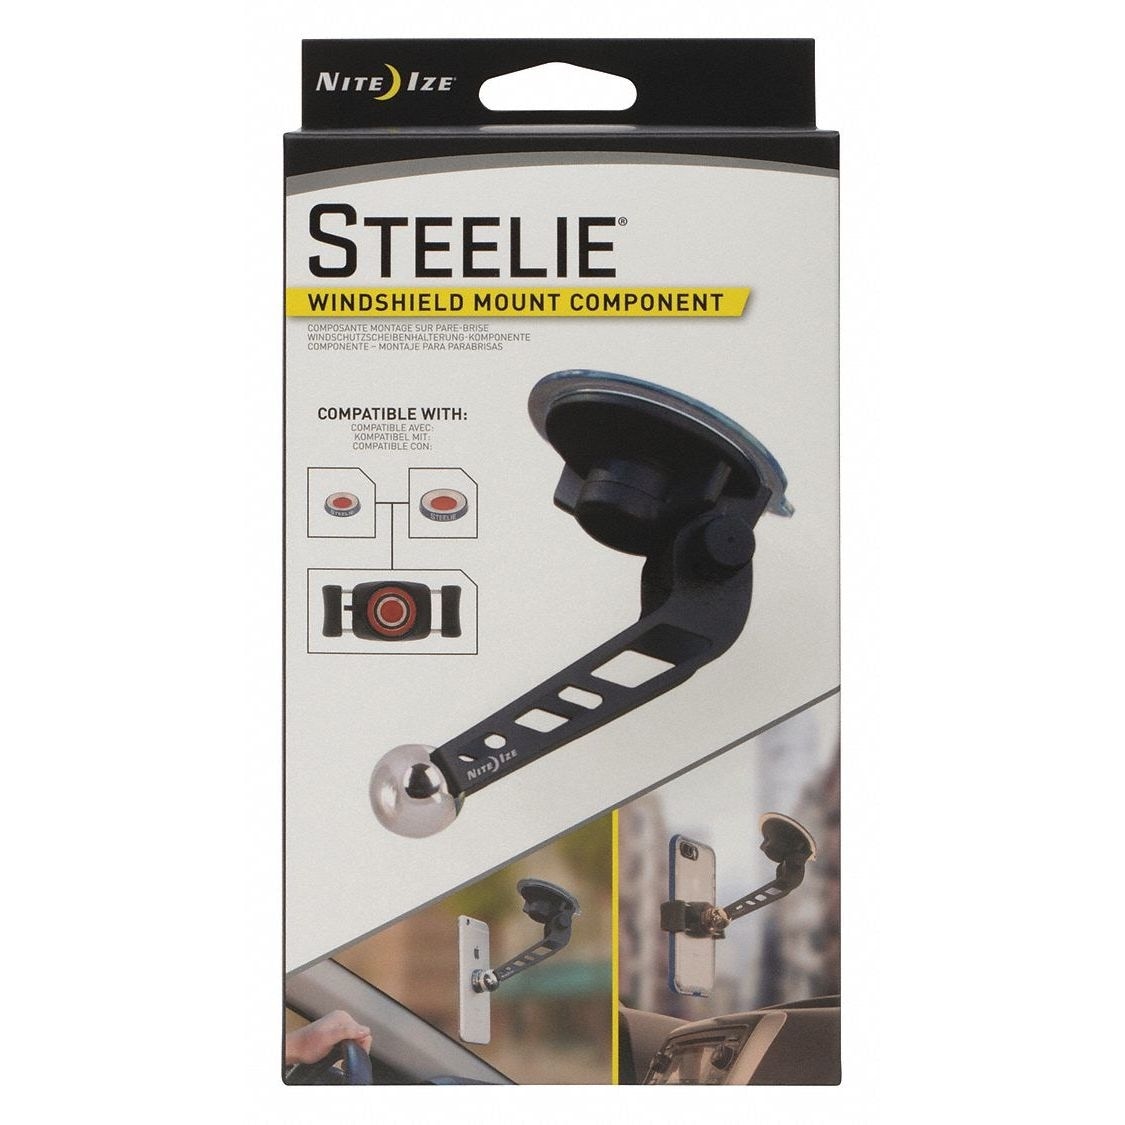 Nite Ize Cell Phone Windshield Mount: Aluminum/Neodymium/Silicone/Stainless Steel, Black STWS-01-R8 - 1 Each